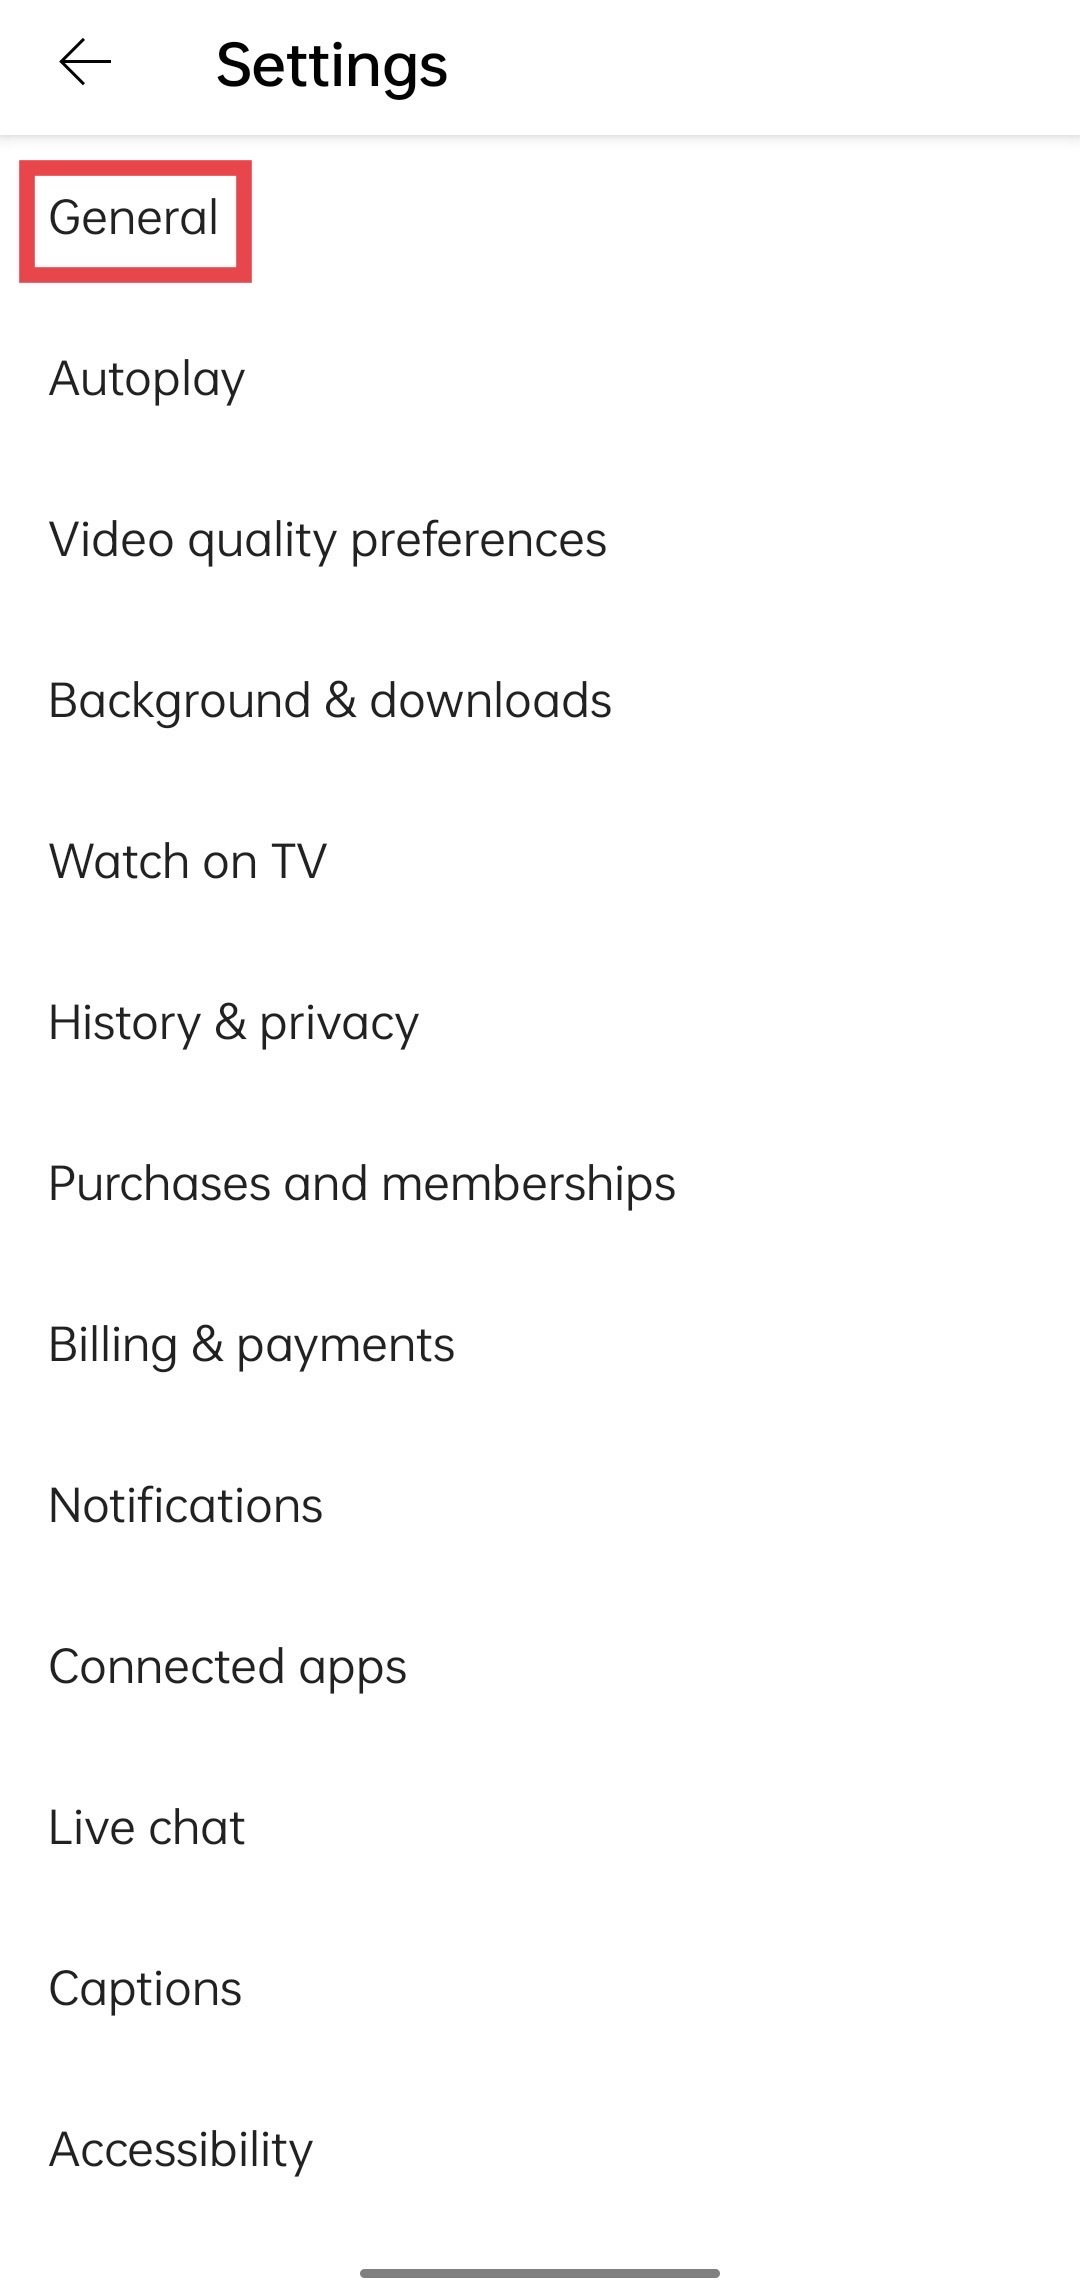 Parental Control Tap Settings in YouTube Application